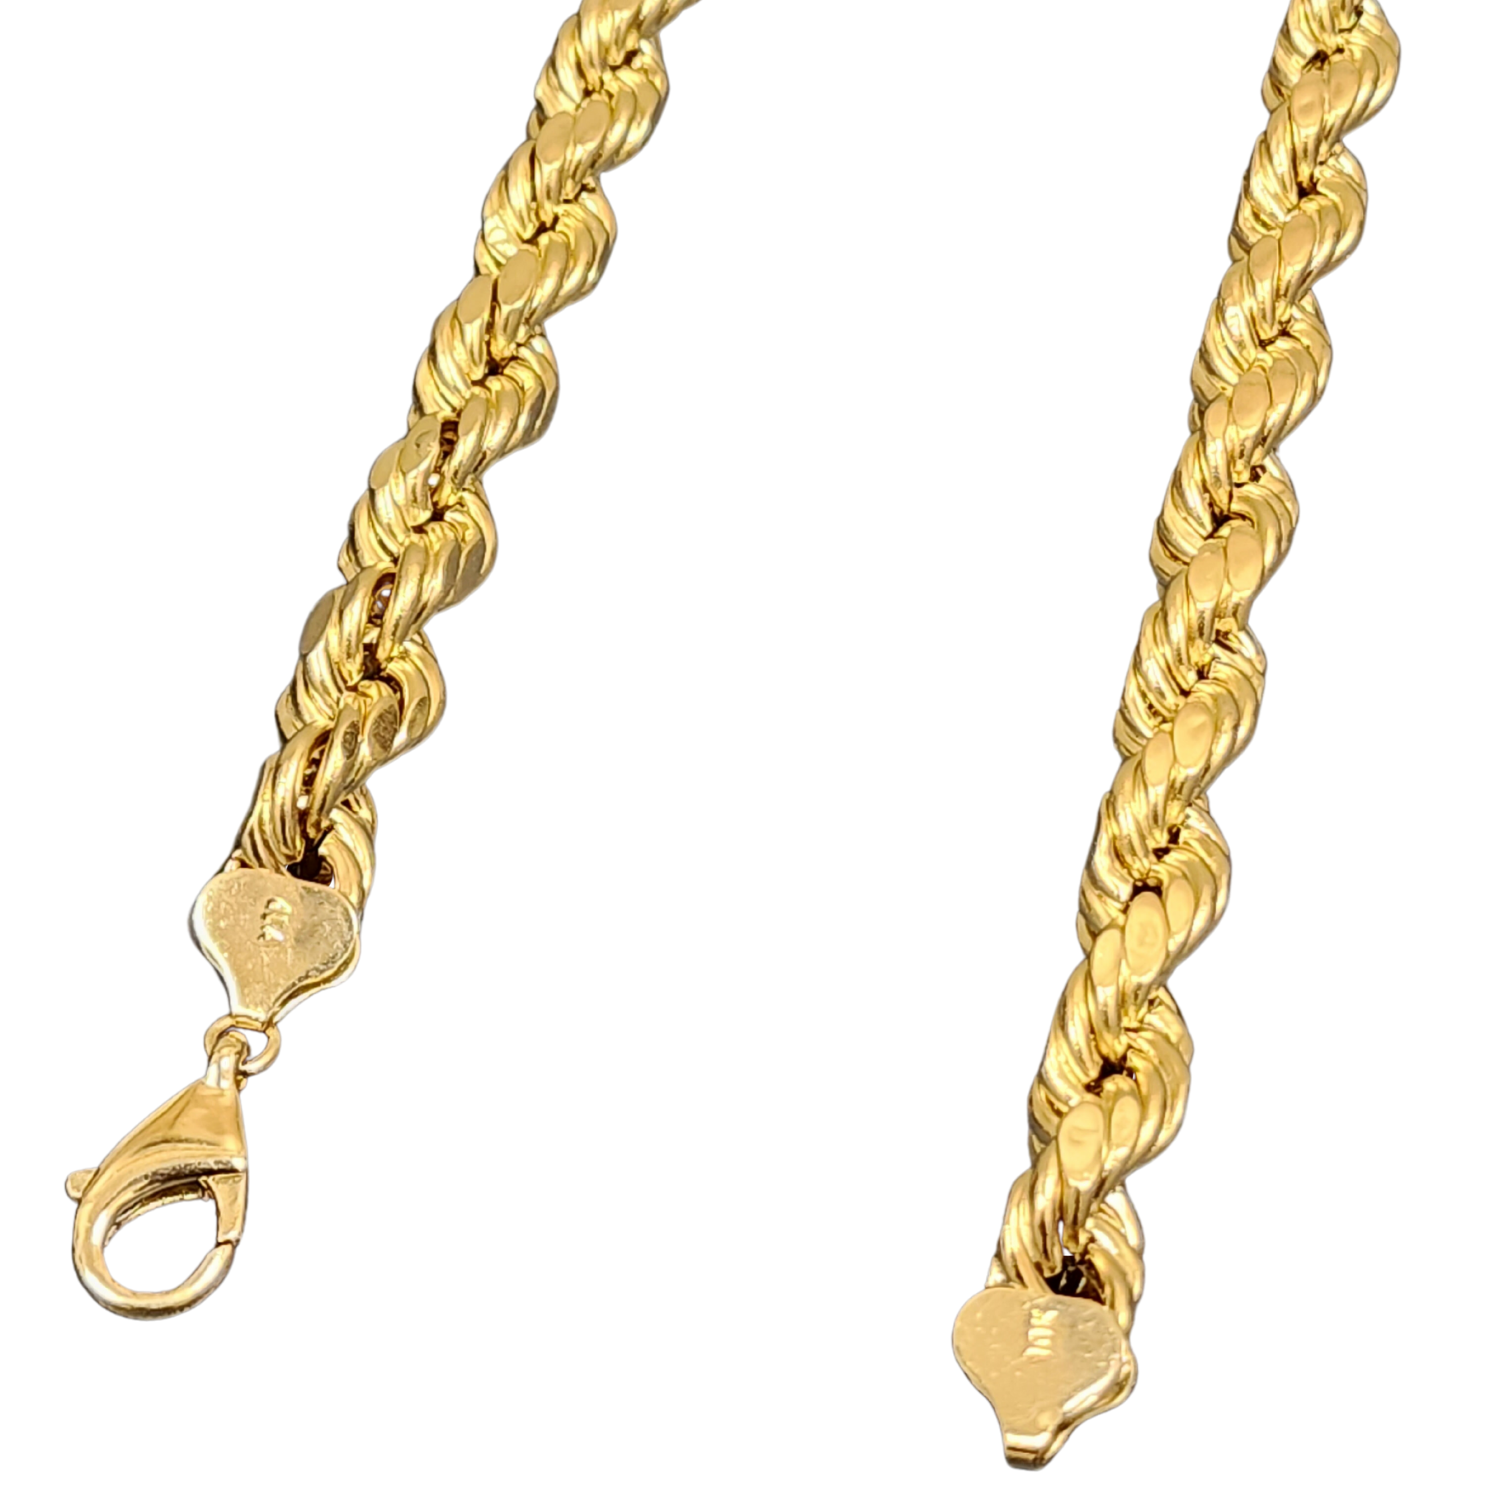 10K Hollow Gold Air-Solid Curb Chain Made in Italy - 30